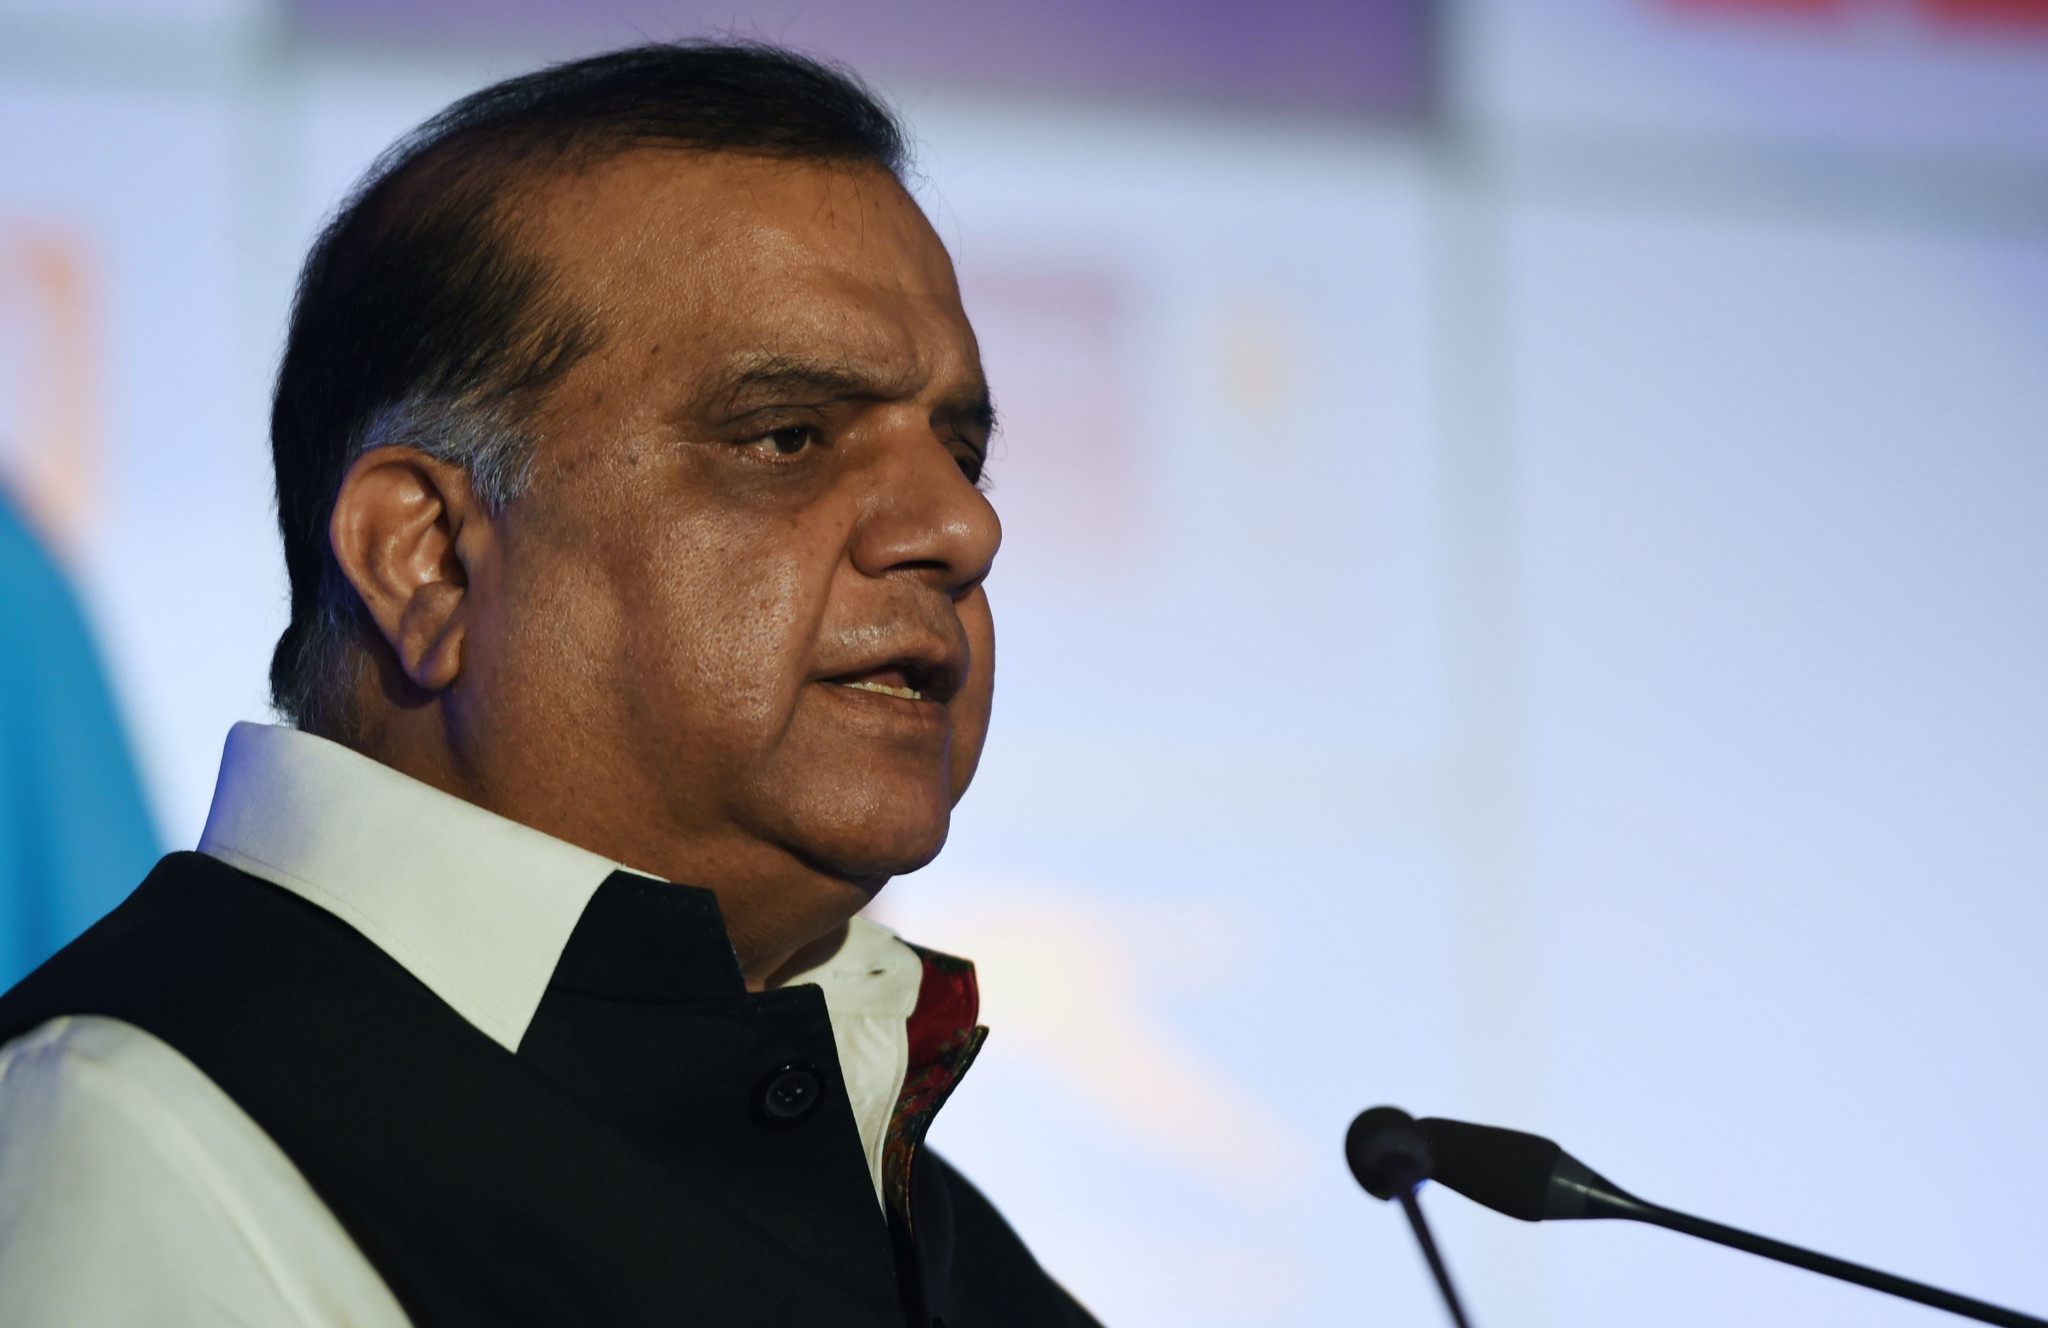 IOA President Narinder Dhruv Batra said the organisation is committed to ushering a new era in Indian sports ©Getty Images